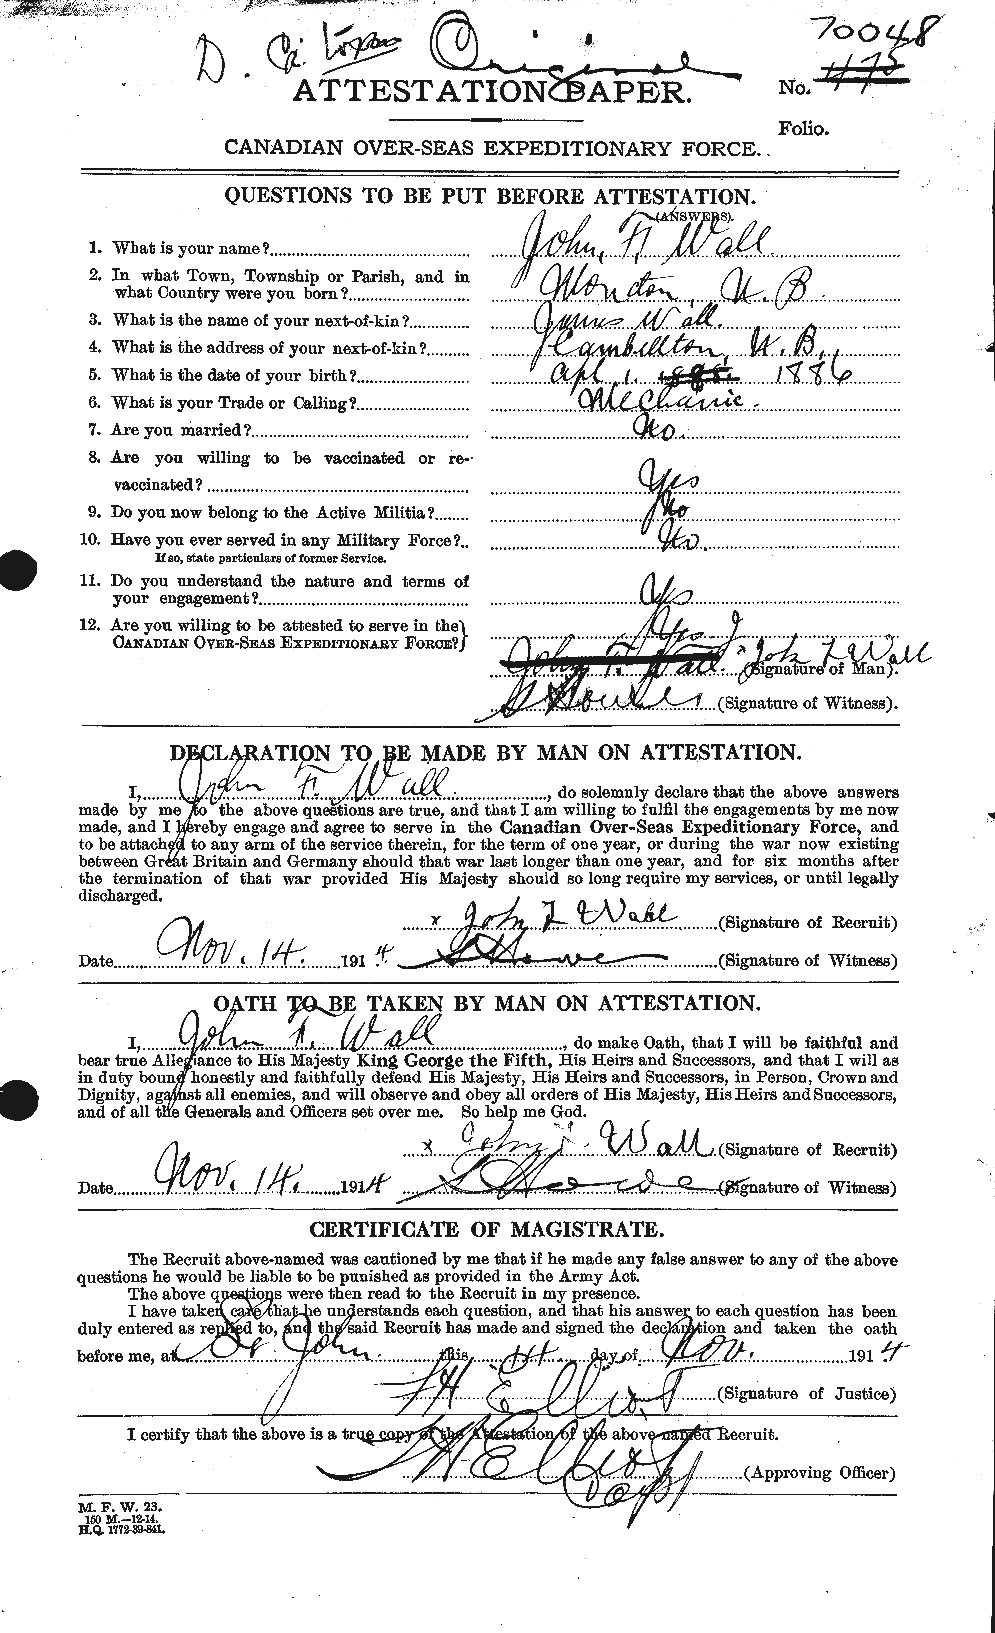 Personnel Records of the First World War - CEF 650259a